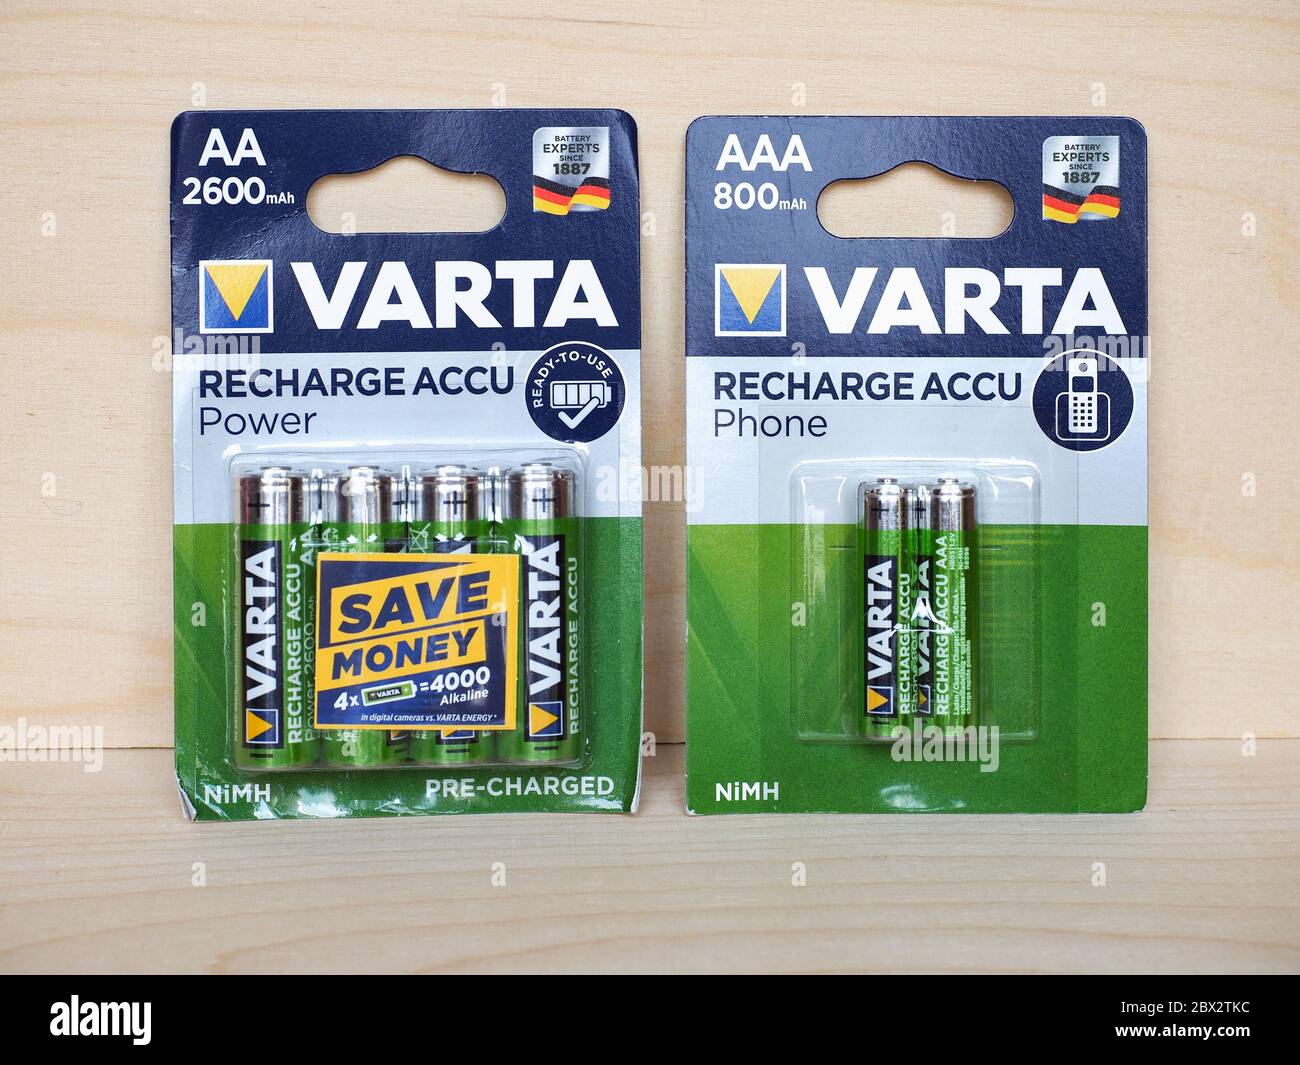 HANNOVER, GERMANY - CIRCA MAY 2020: Box of Varta rechargeable batteries  Stock Photo - Alamy